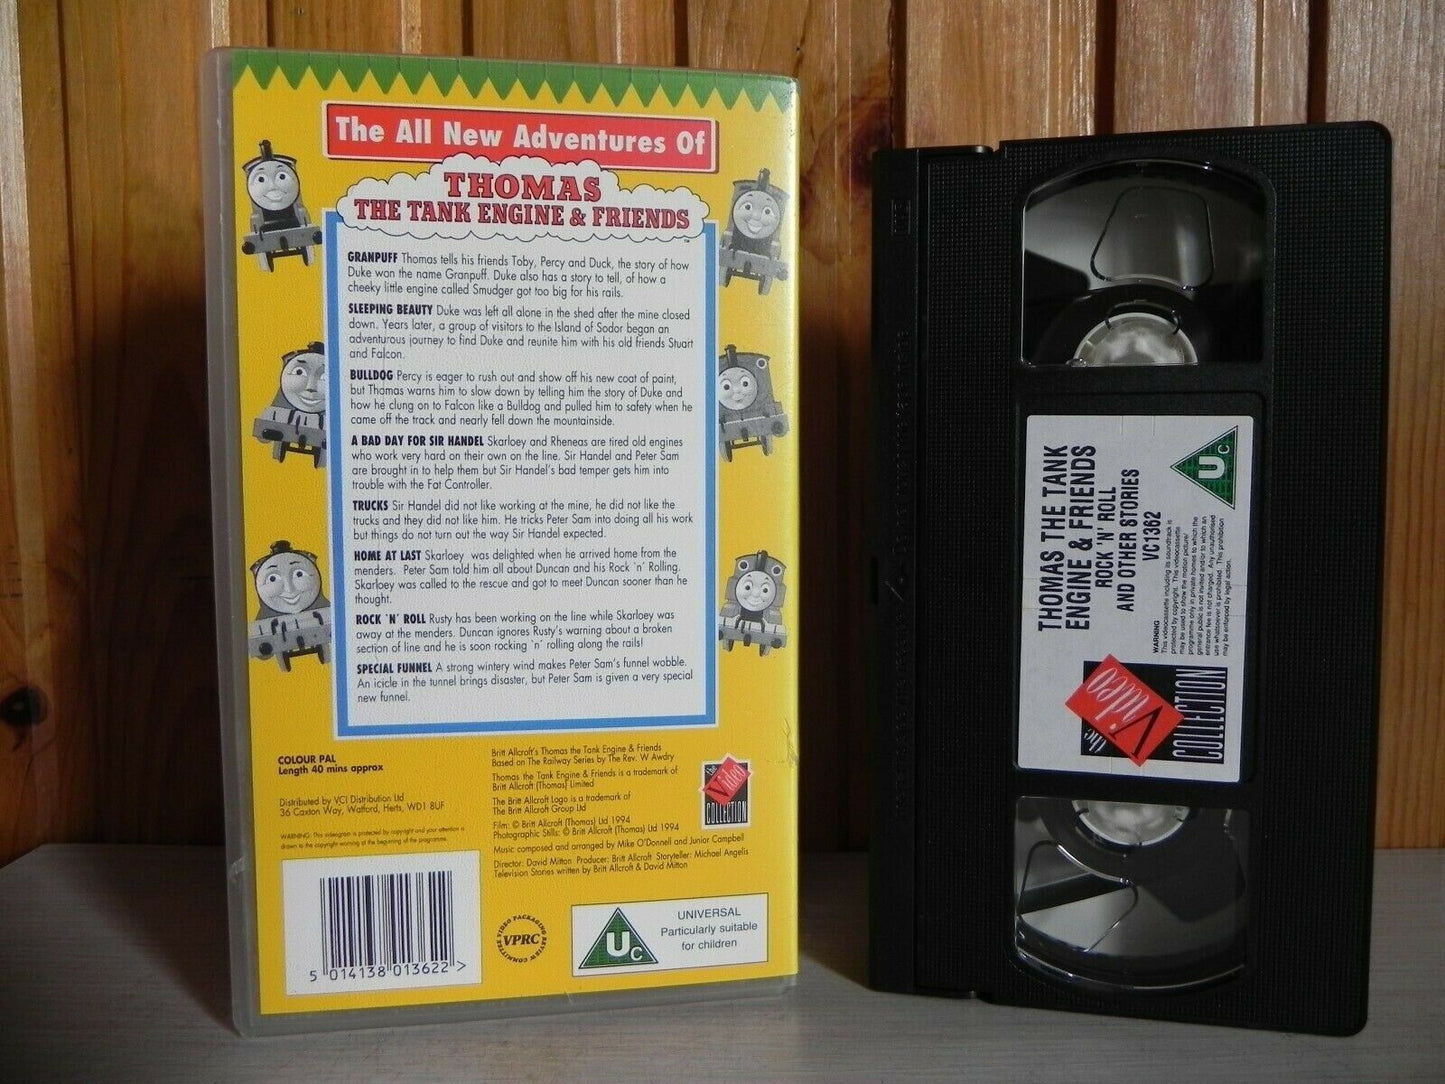 CHILDREN'S VIDEO - THOMAS THE TANK ENGINE - ROCK'N'ROLL & OTHERS - 1362 KIDS VHS-